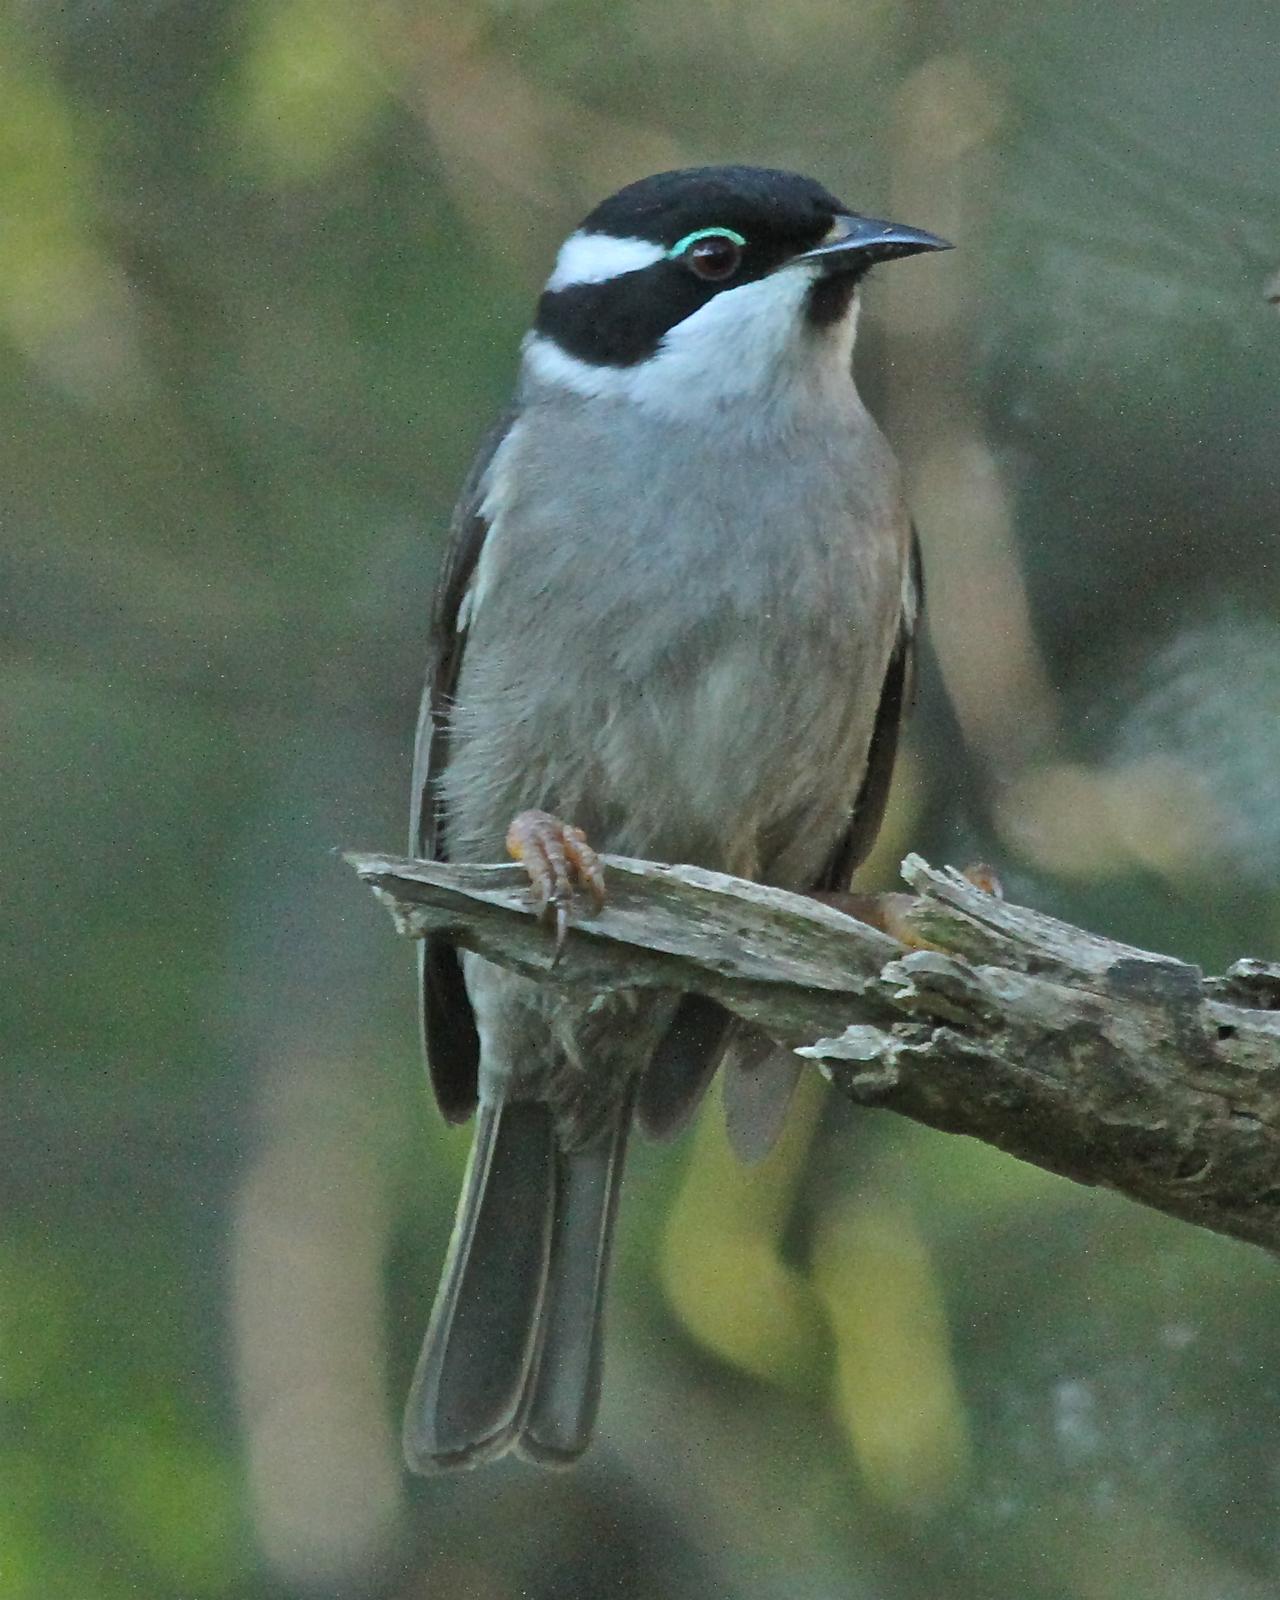 Strong-billed Honeyeater Photo by R. Bruce Richardson